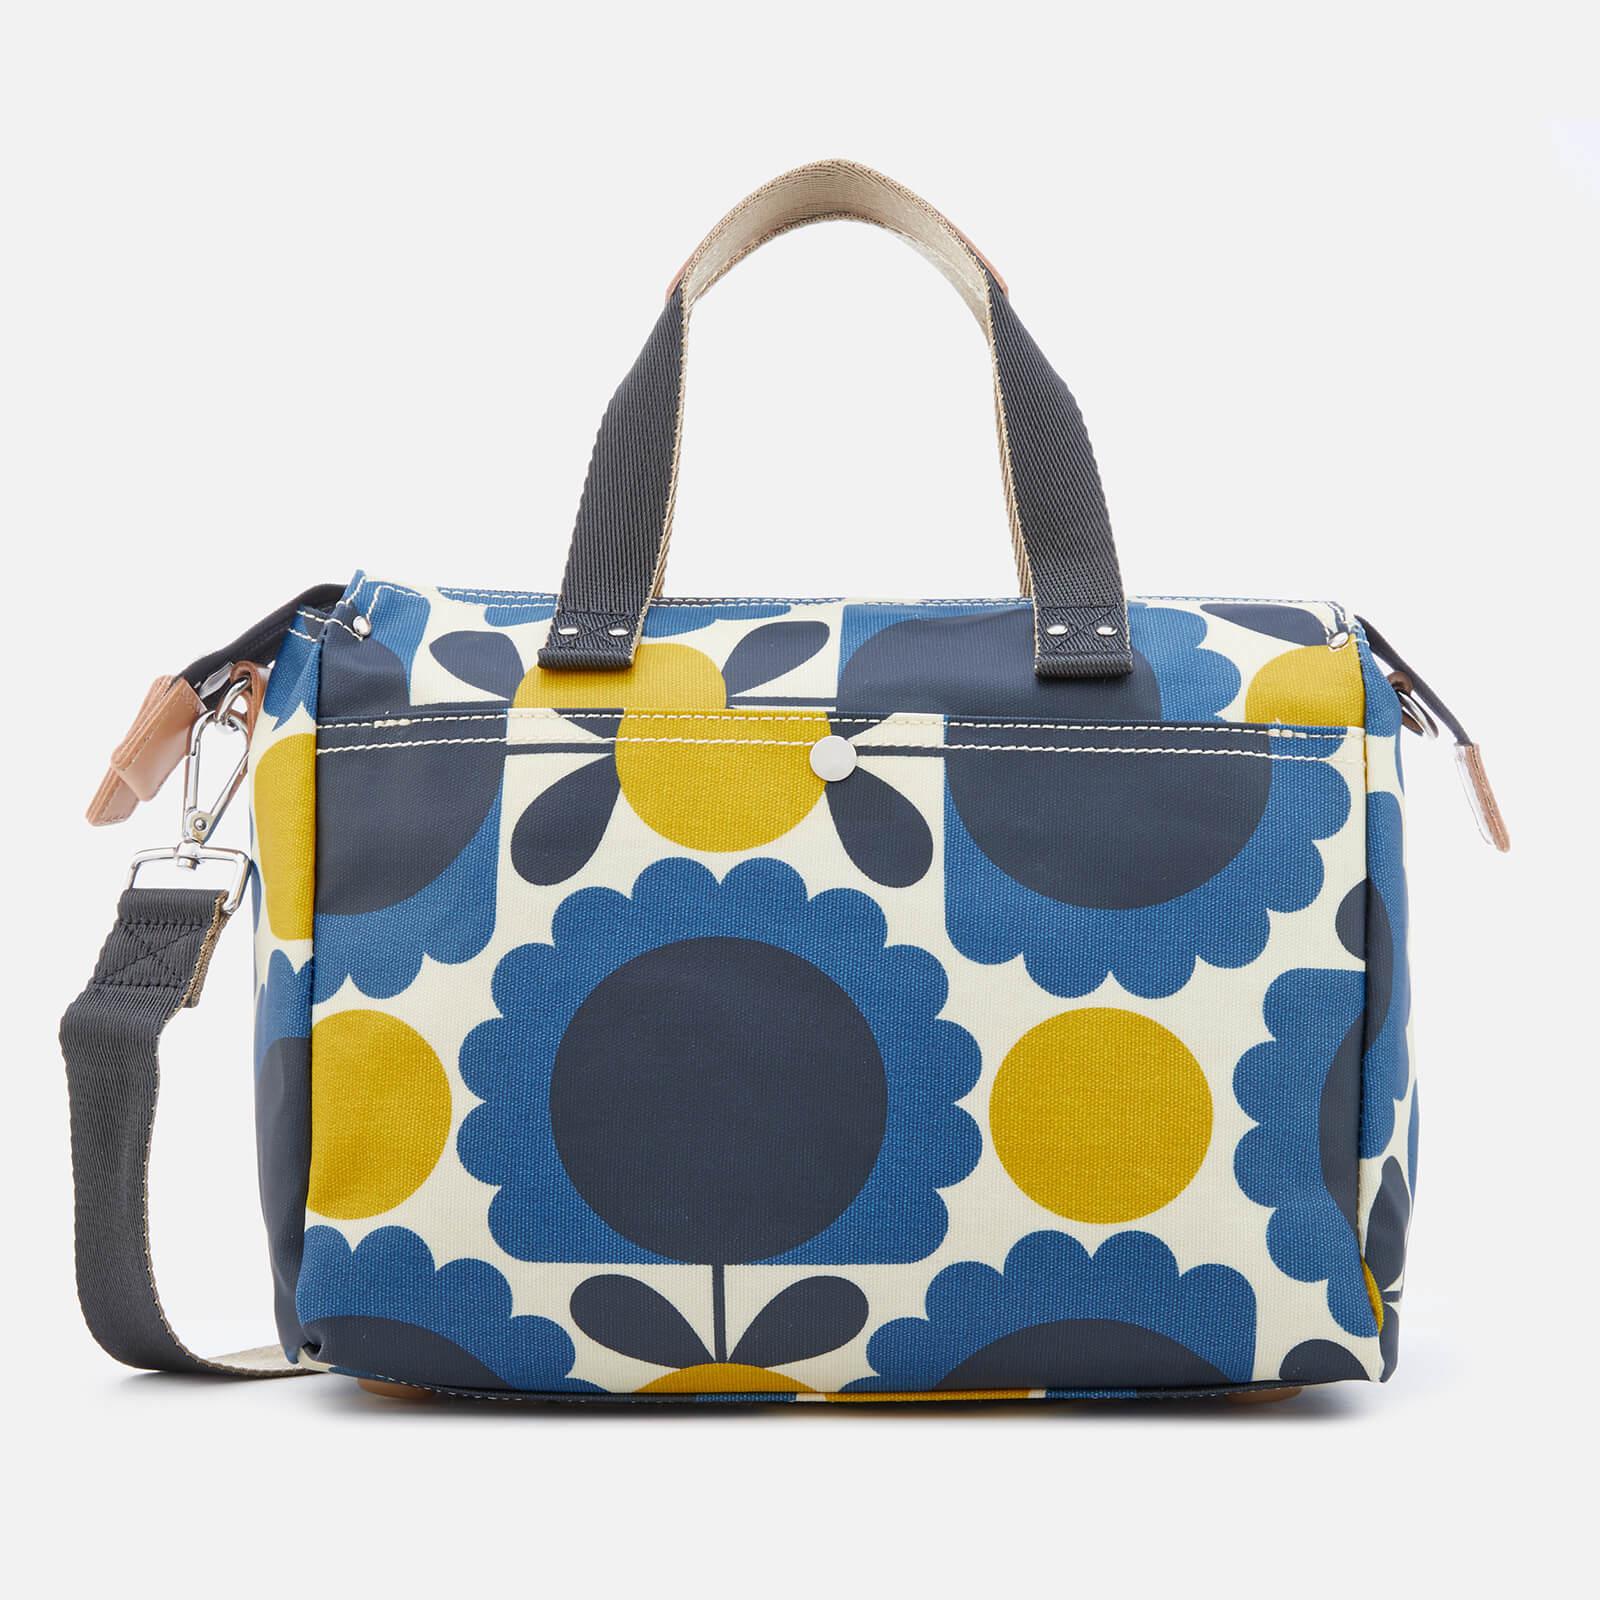 Orla Kiely Cotton Laminated Scallop Flower Small Messenger Bag in Blue Lyst